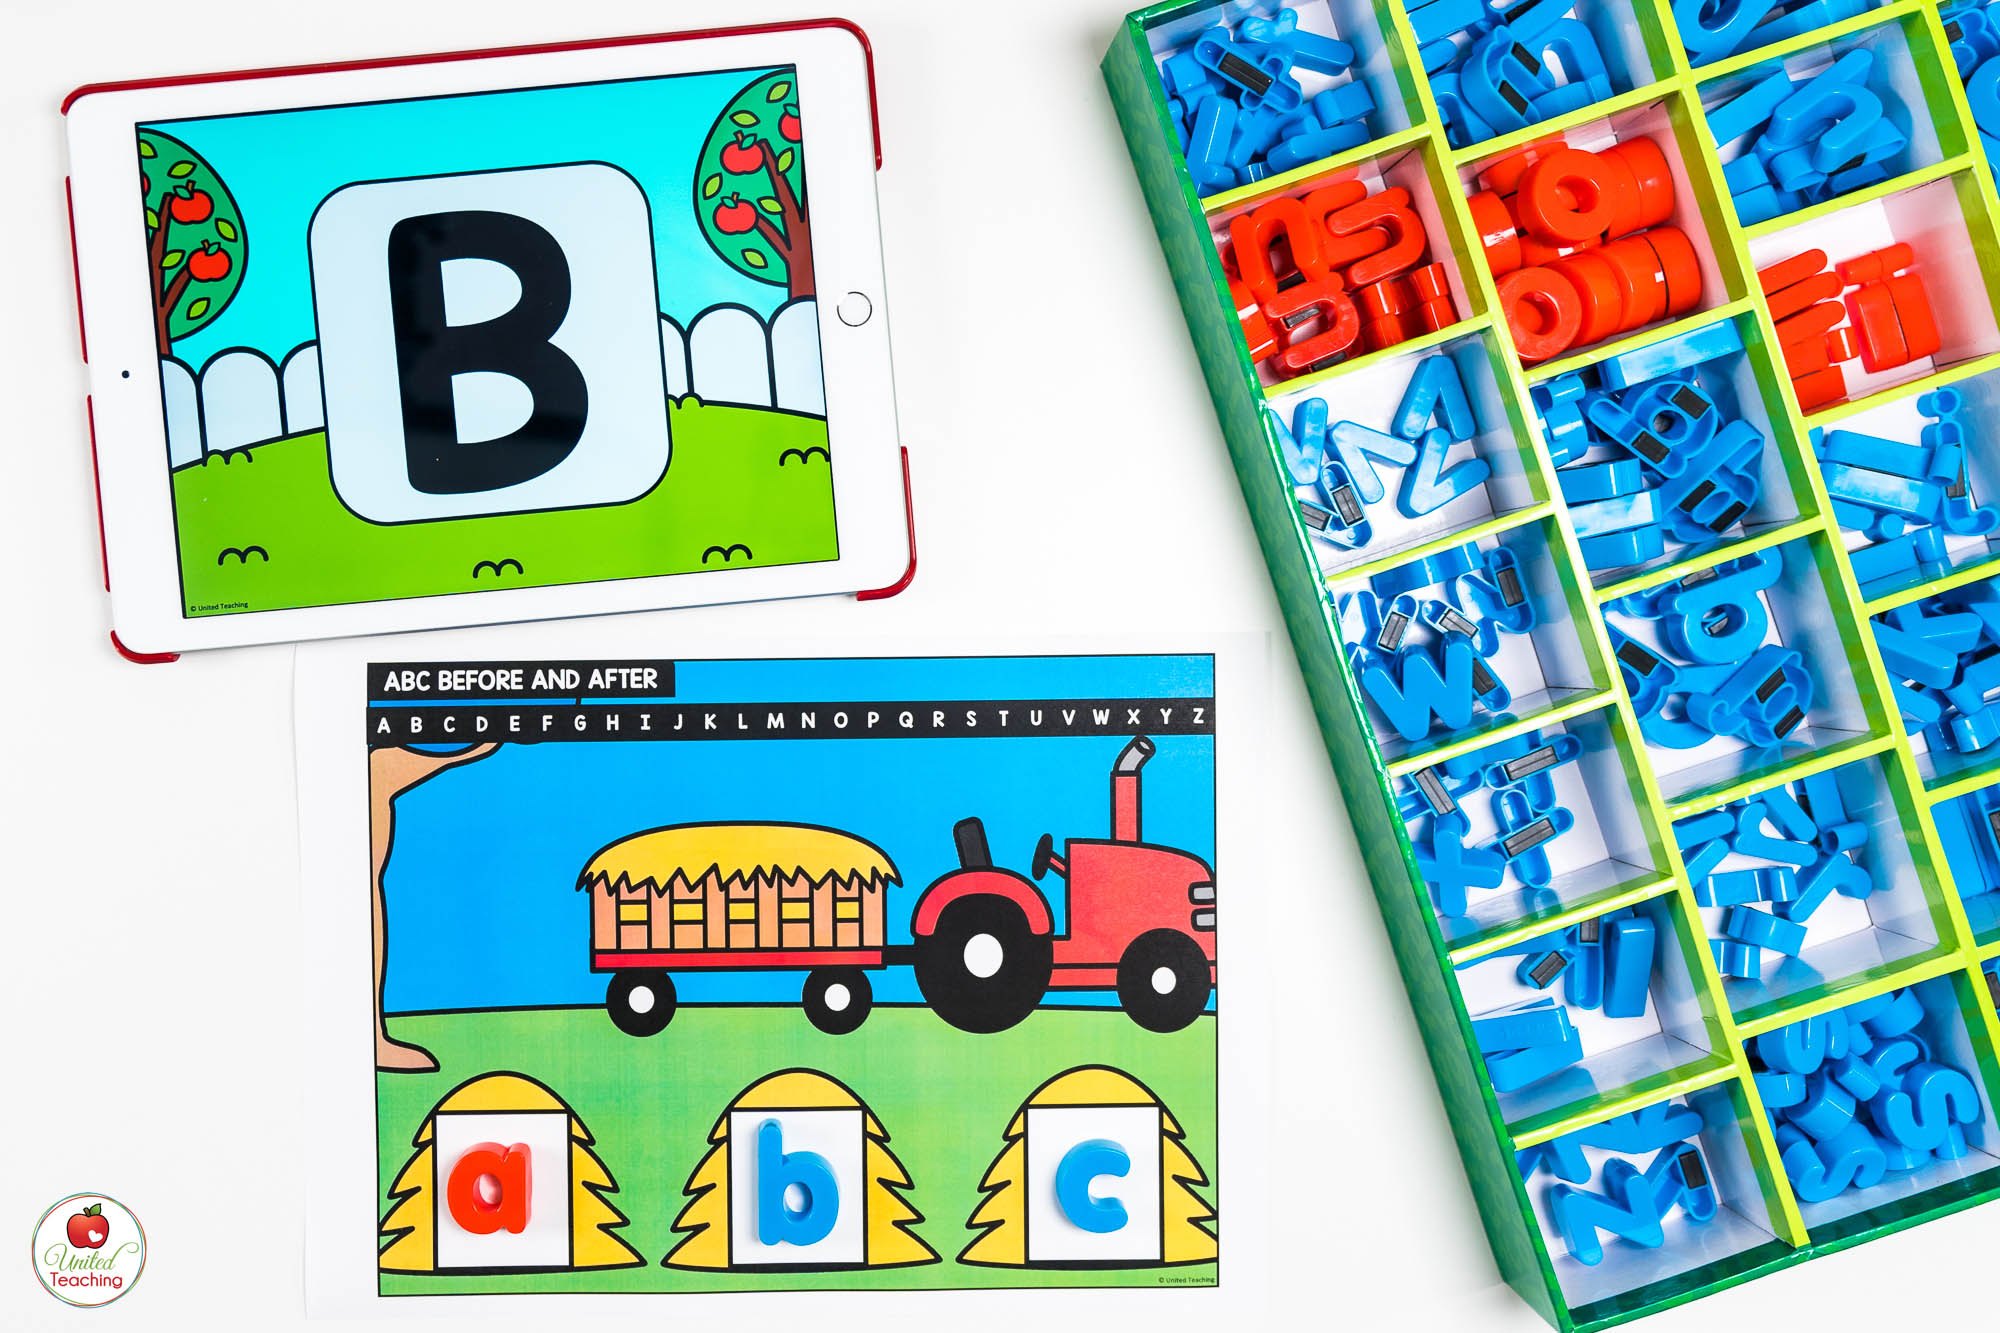 ABC Order Fall Literacy Center with Digital Dice